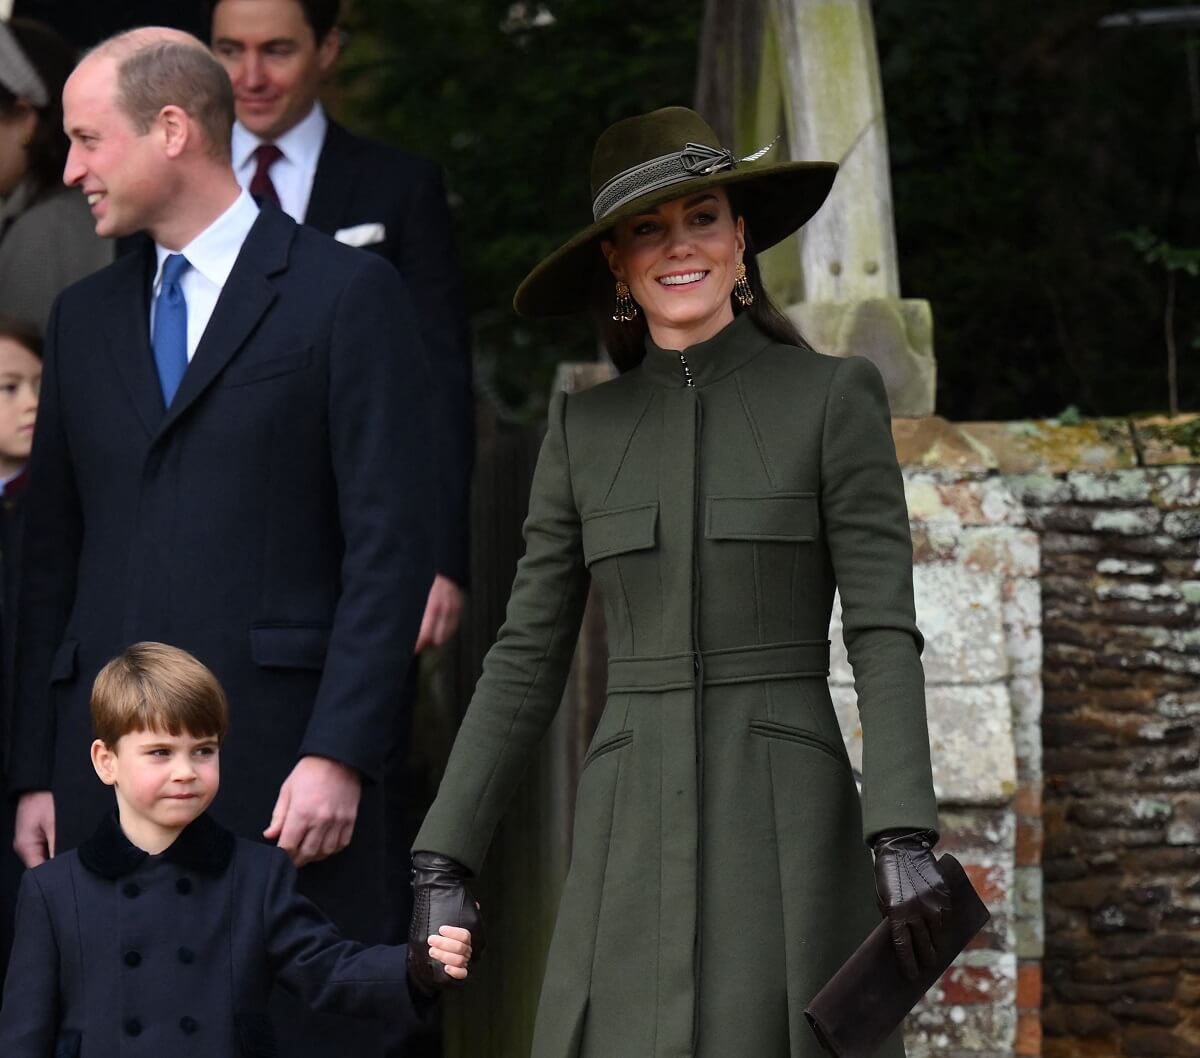 Prince William, Kate Middleton, and Prince Louis leaving church service on Christmas Day